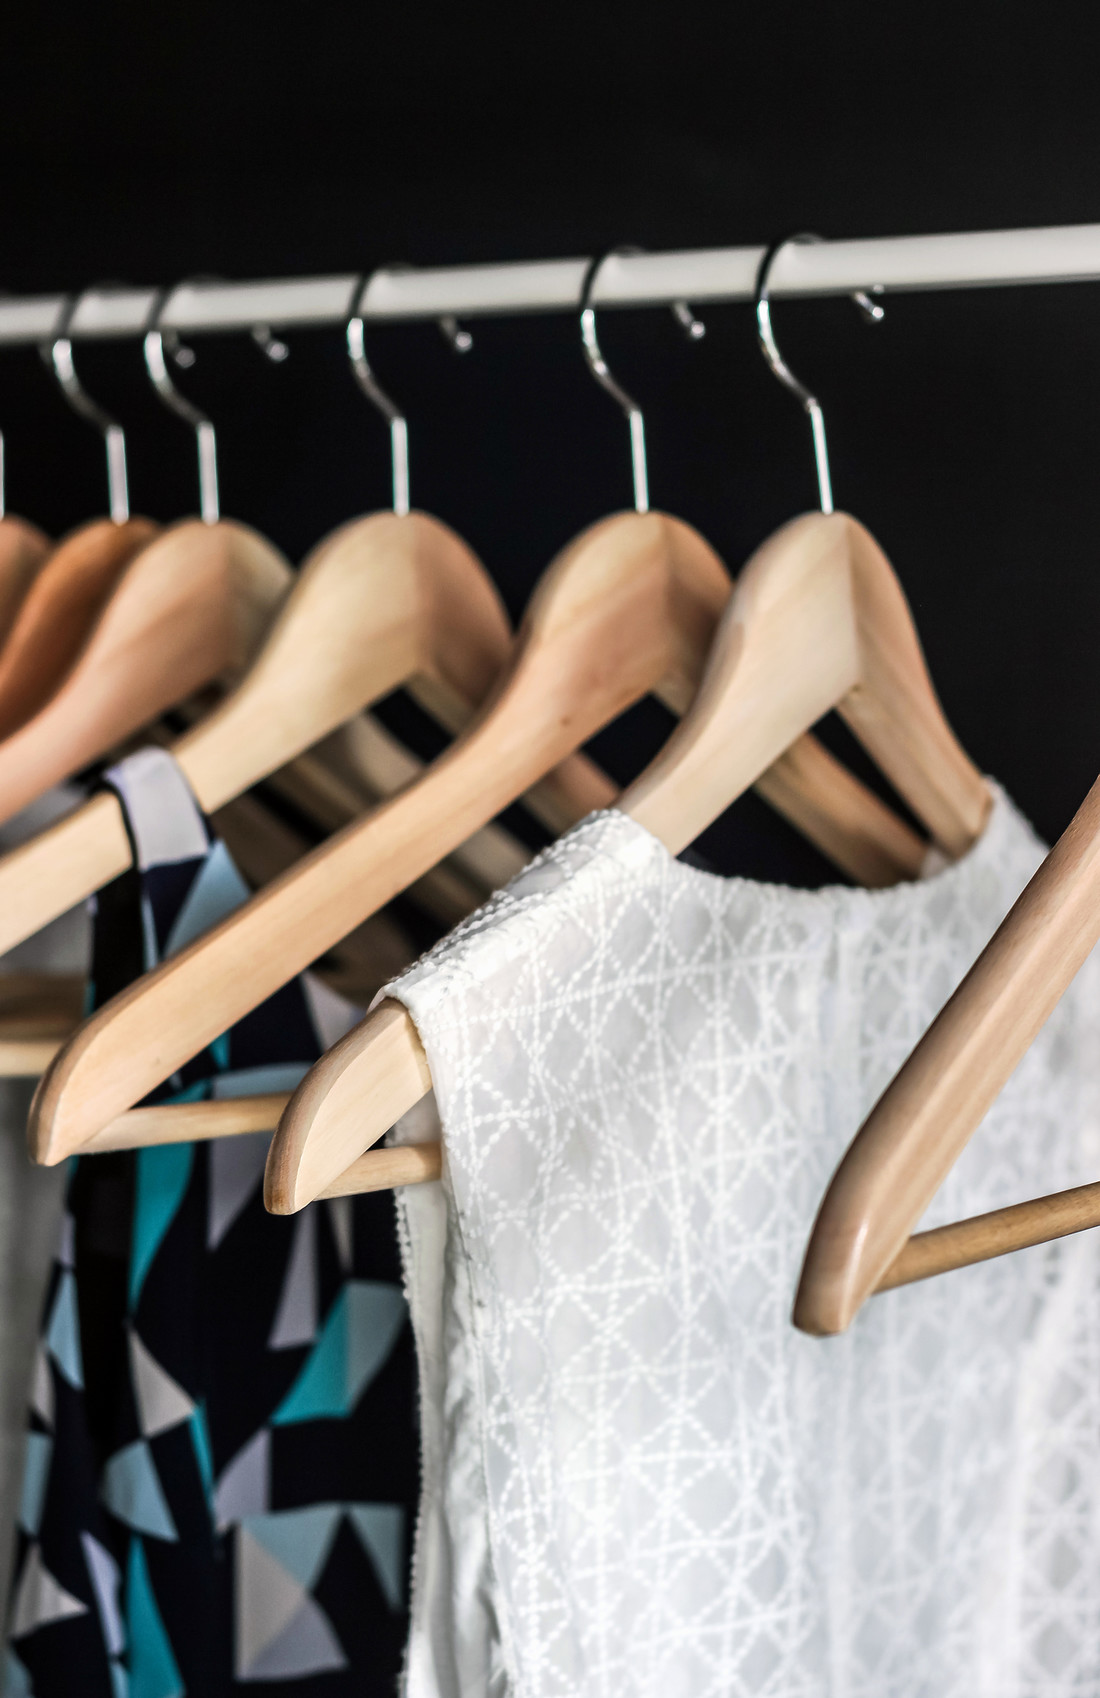 Image of clothes hanging in a closet